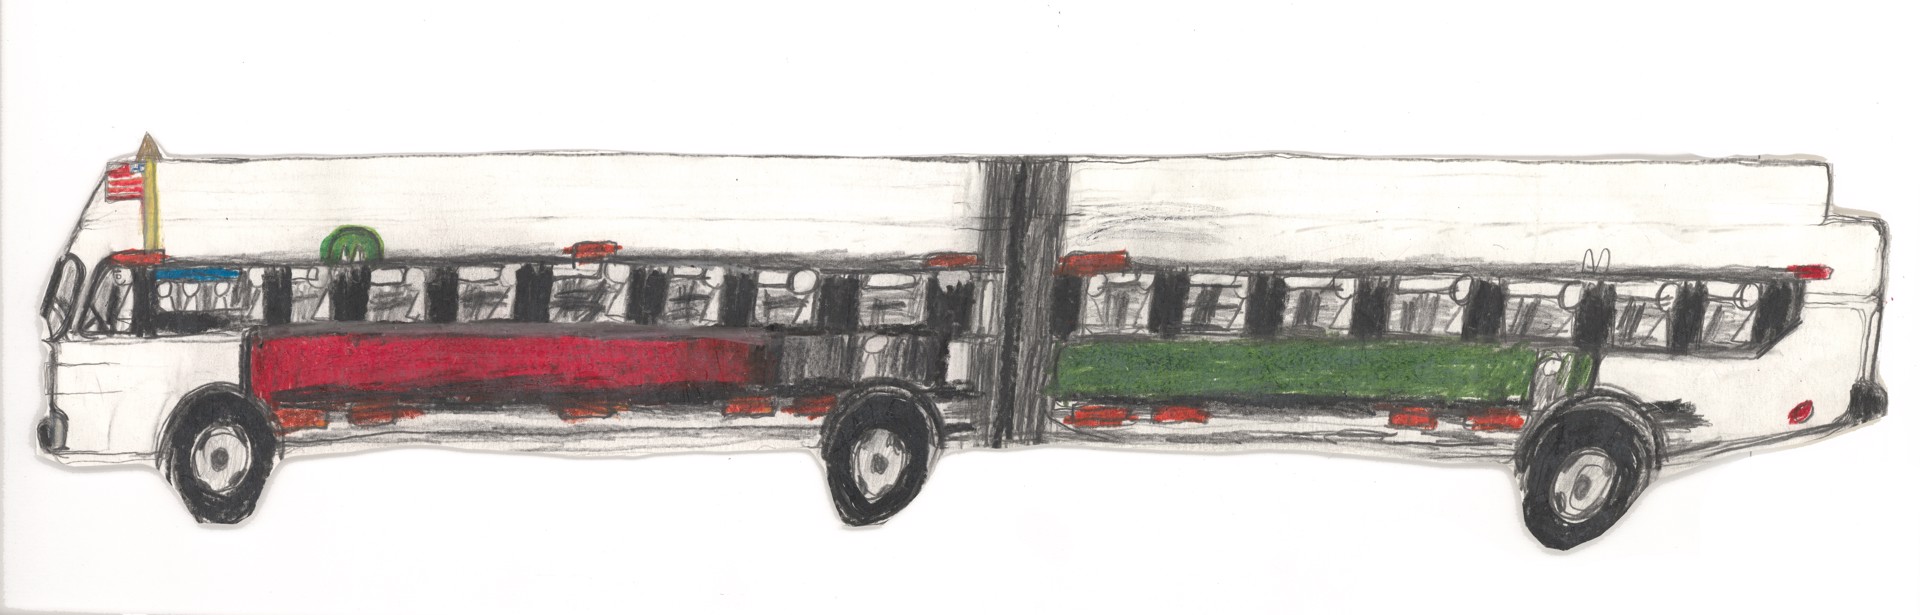 Red and Black Long Bus by Michael Haynes